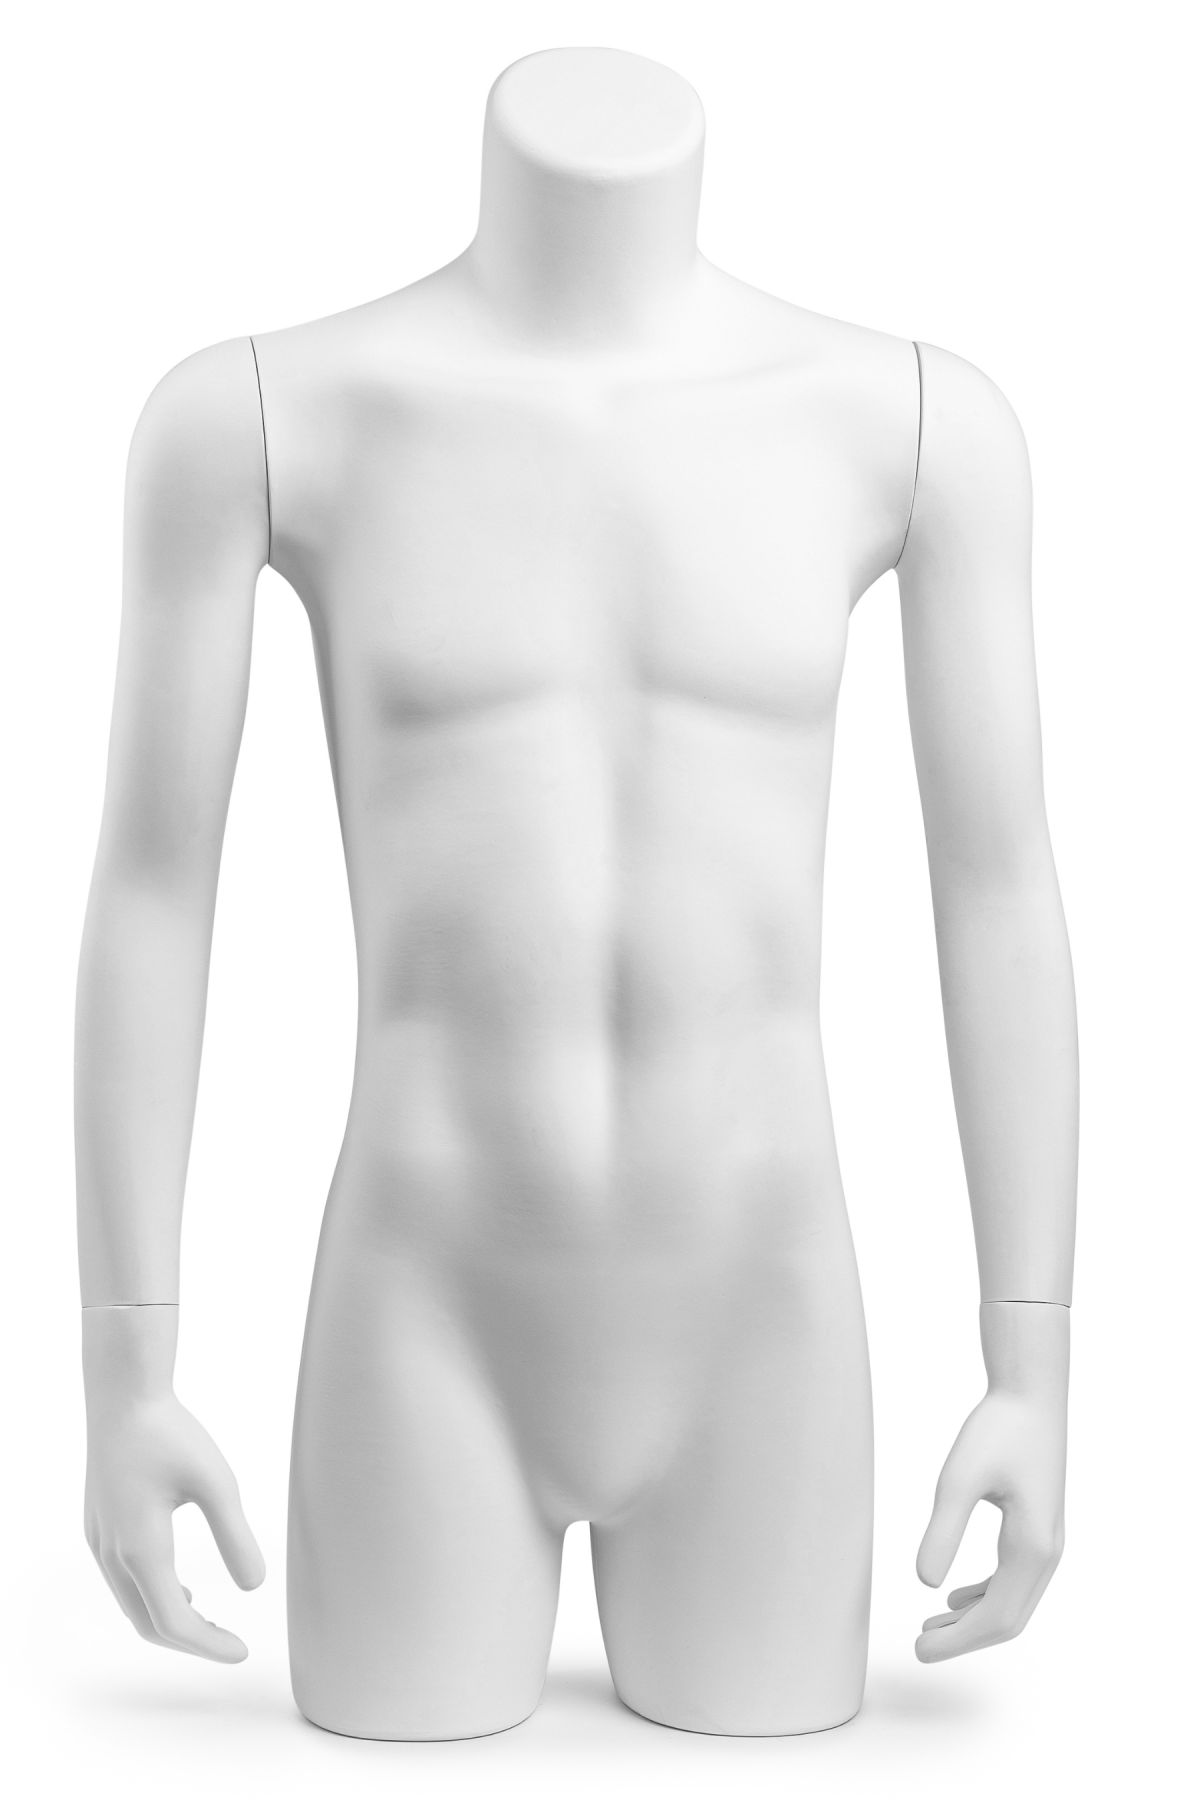 Full Body Male Mannequin In White - Arms Beside The Body